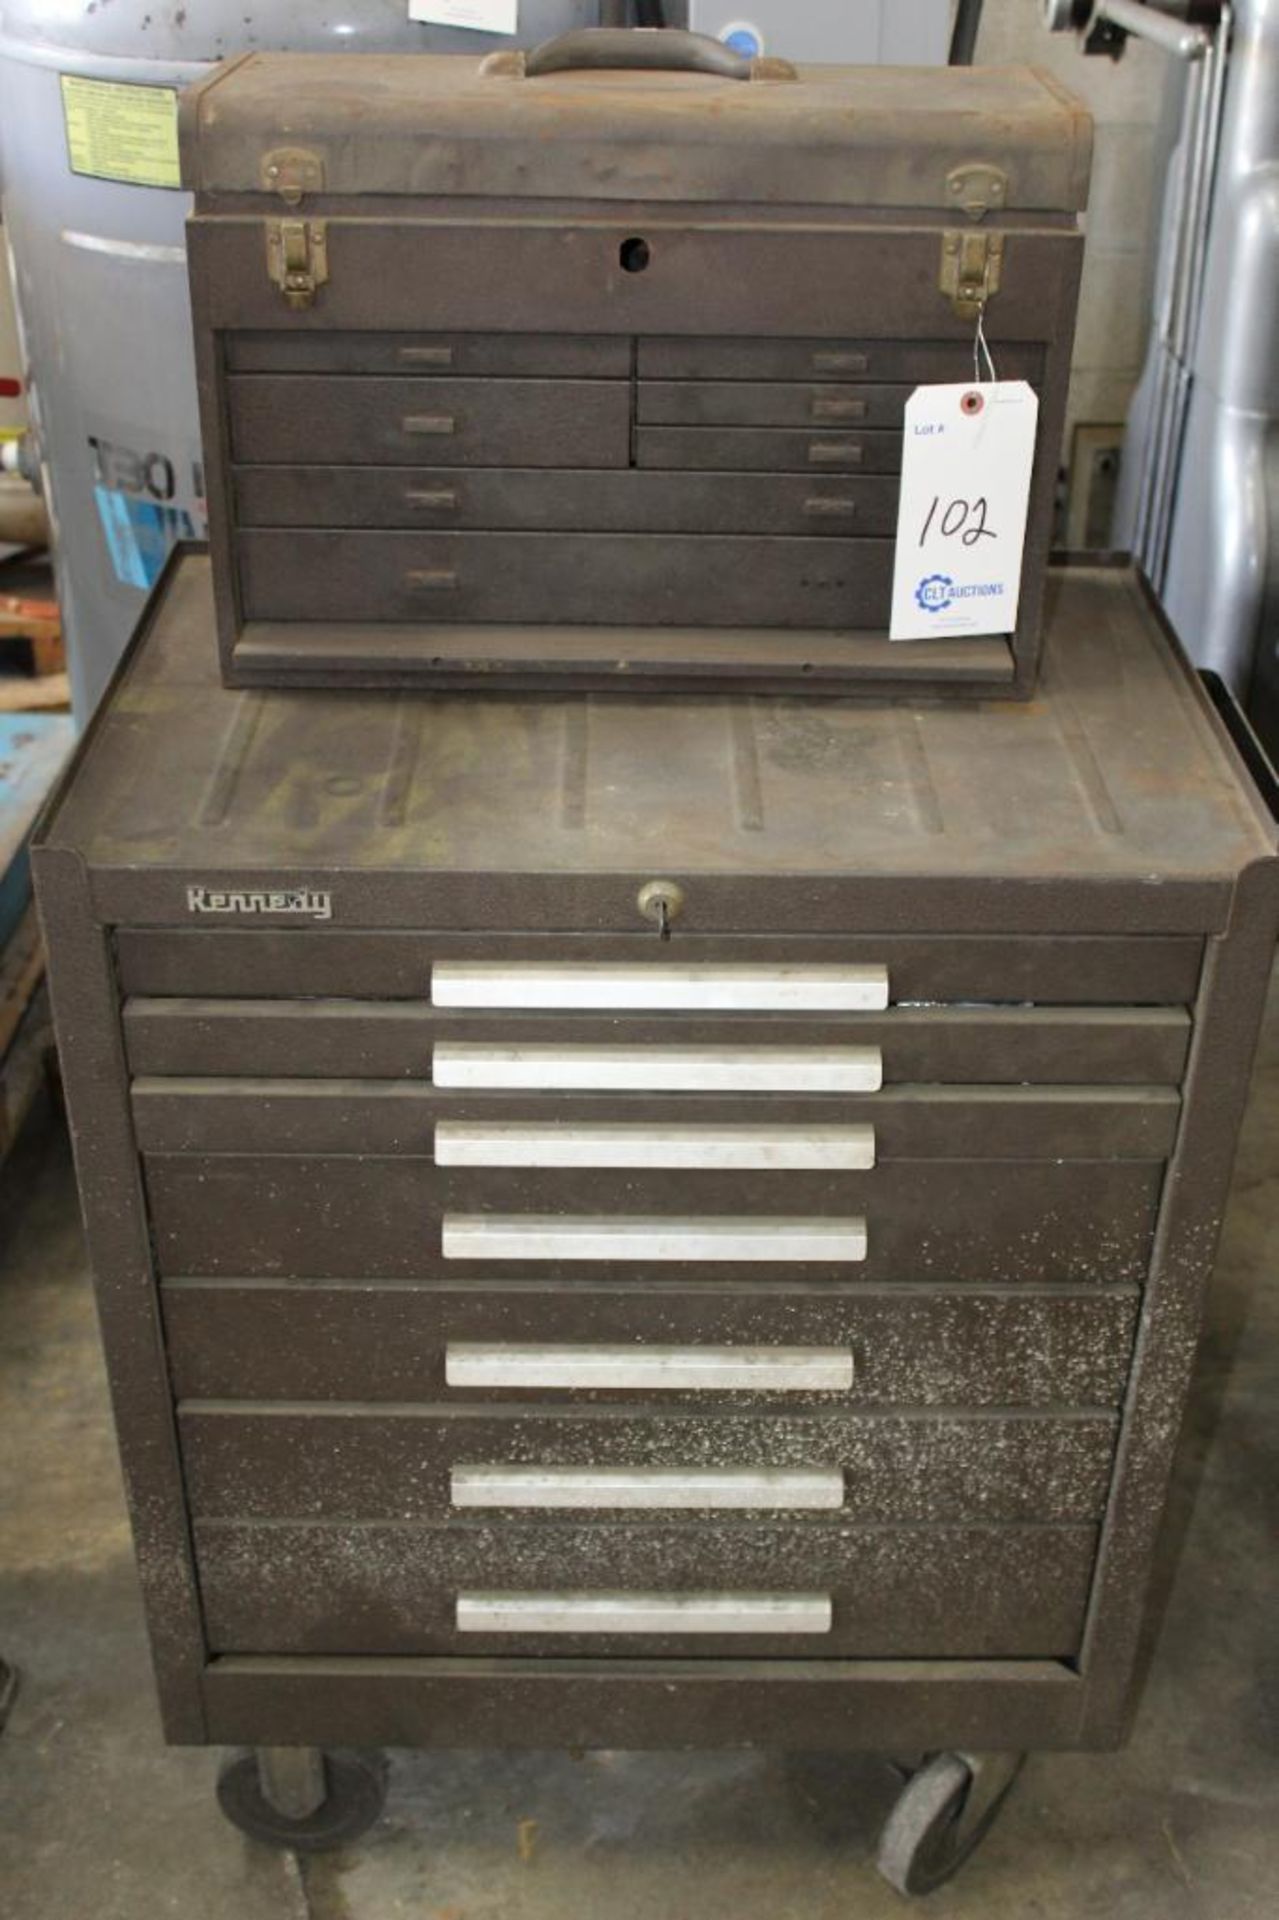 Kennedy tool box w/contents